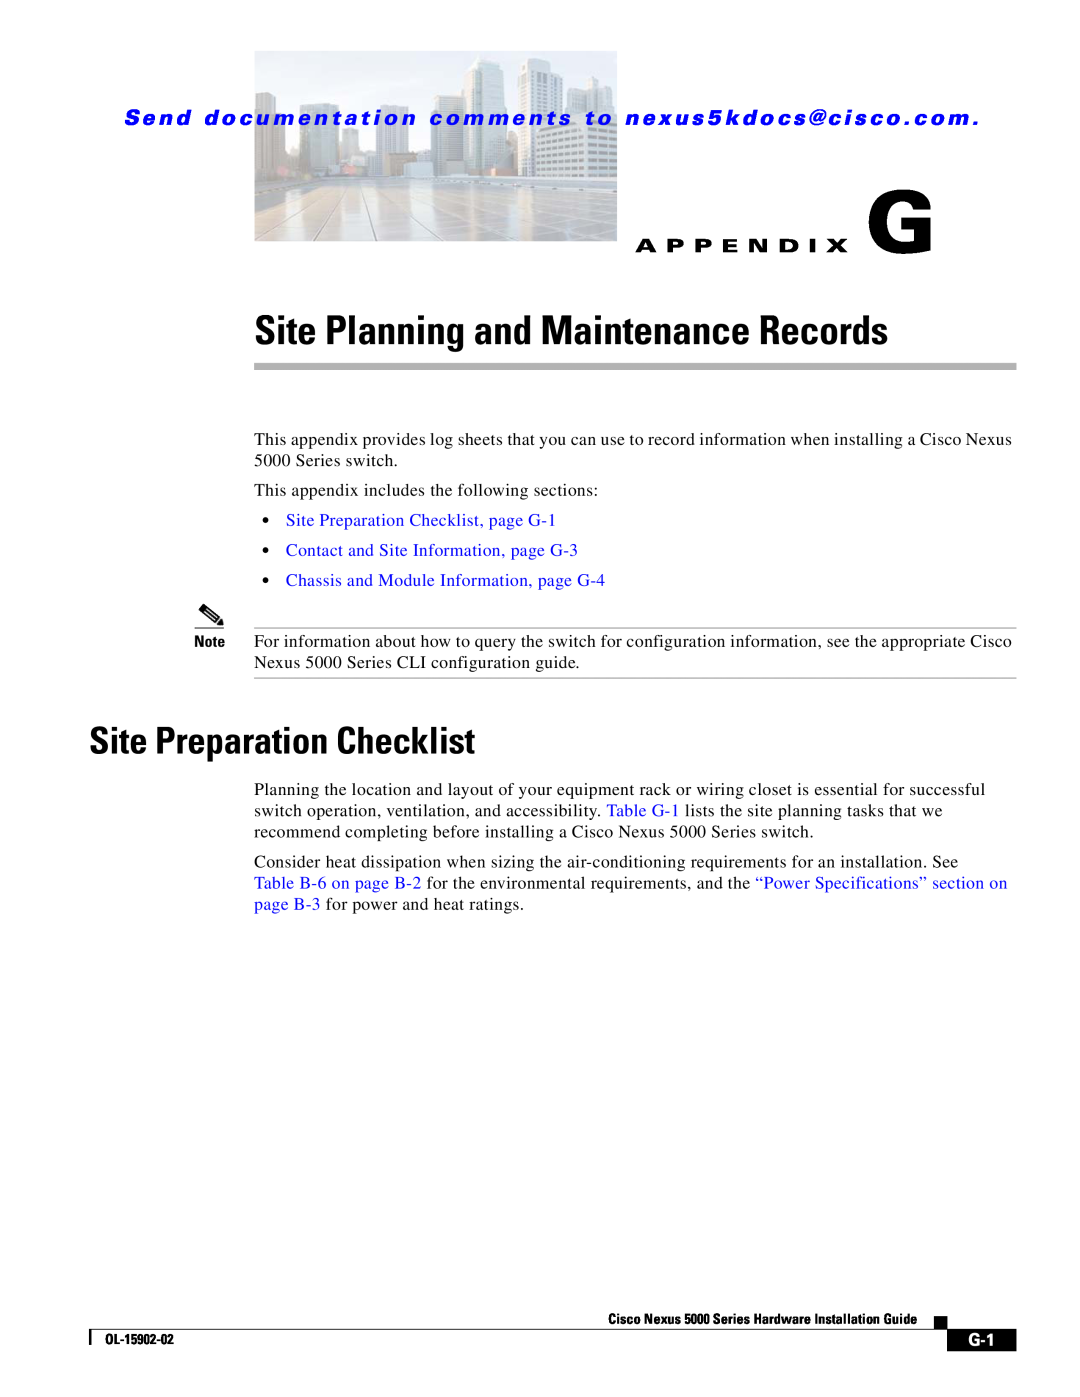 Cisco Systems 5000 manual Site Planning and Maintenance Records, A P P E N D I X G, Site Preparation Checklist, page G-1 